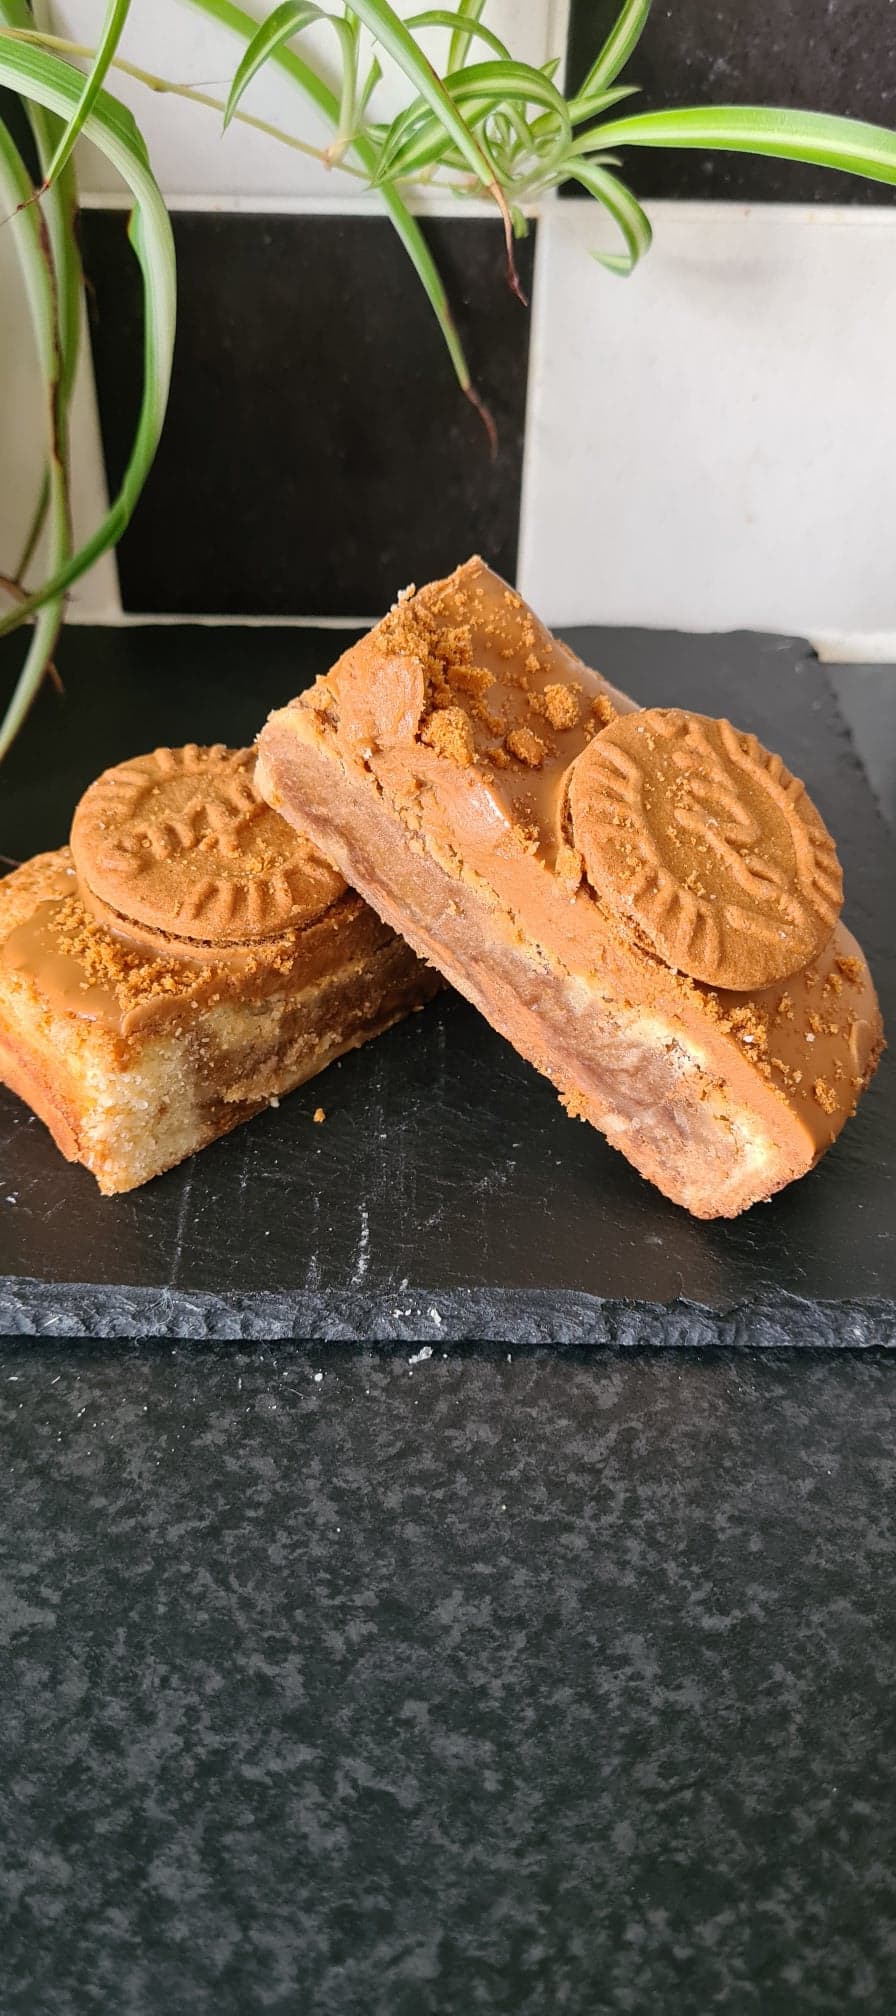 A biscoff blondie, loaded with biscoff for all the lotus lovers out there!